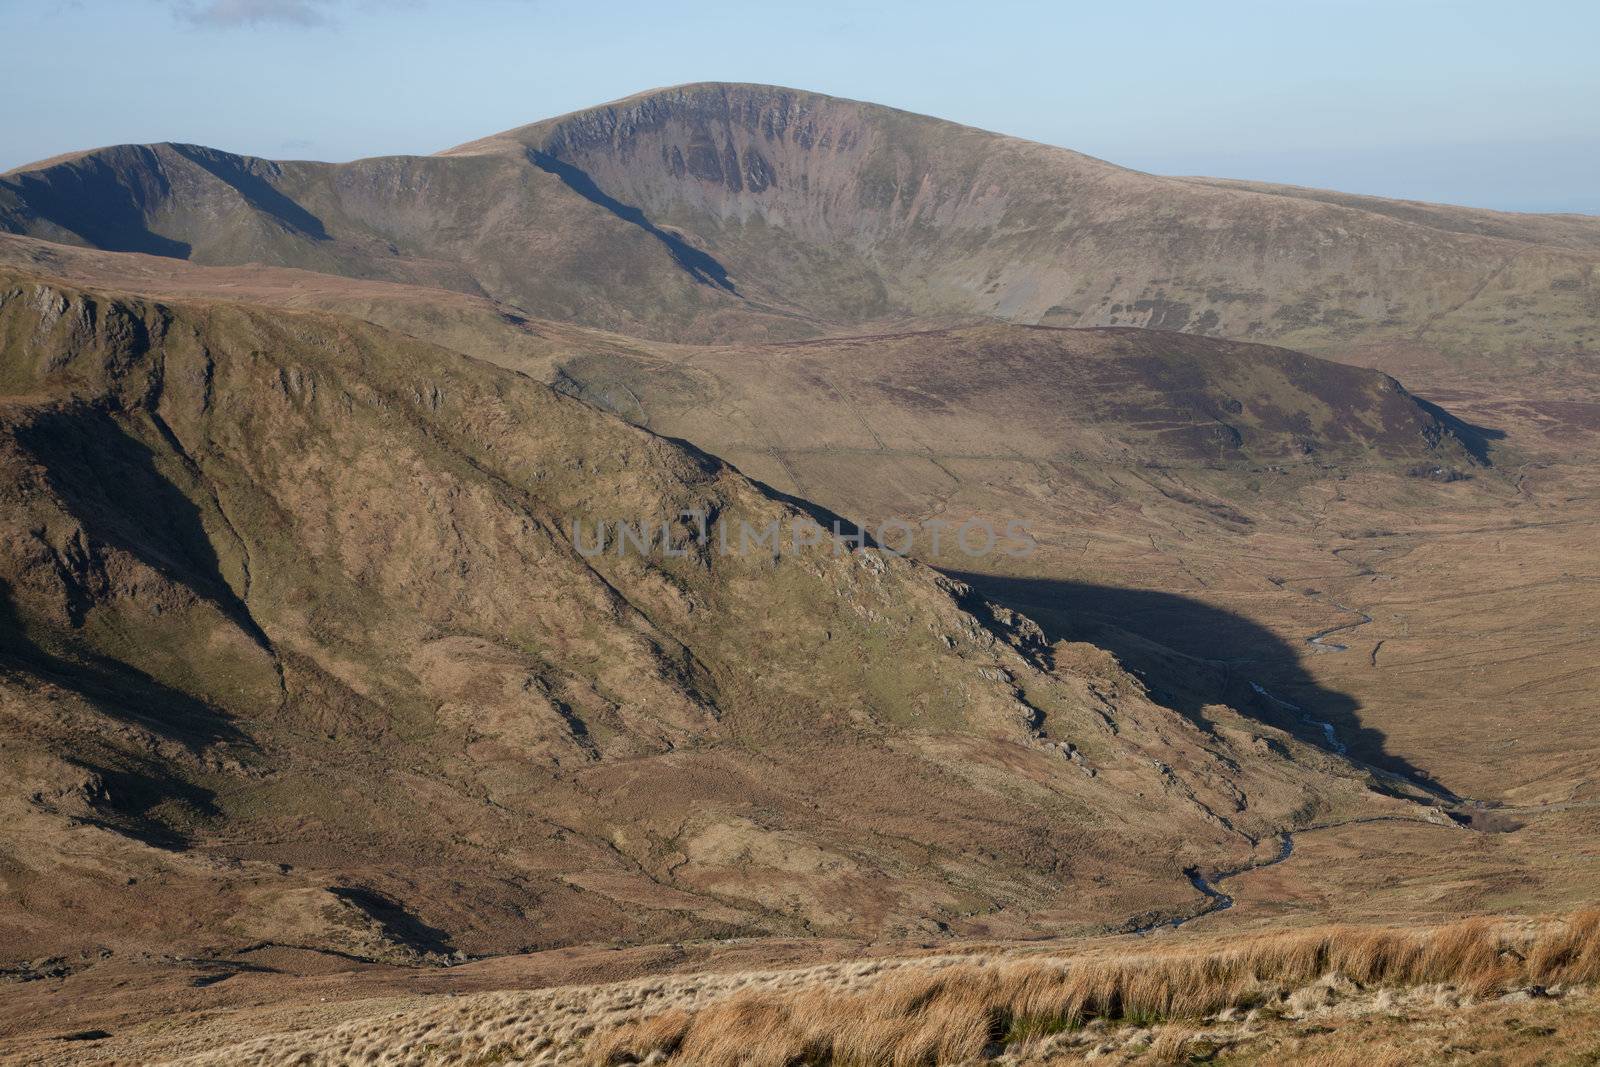 A valley with mountain spurs and river leads to the peak of Moel Eilio, Snowdonia national park, Wales, UK.